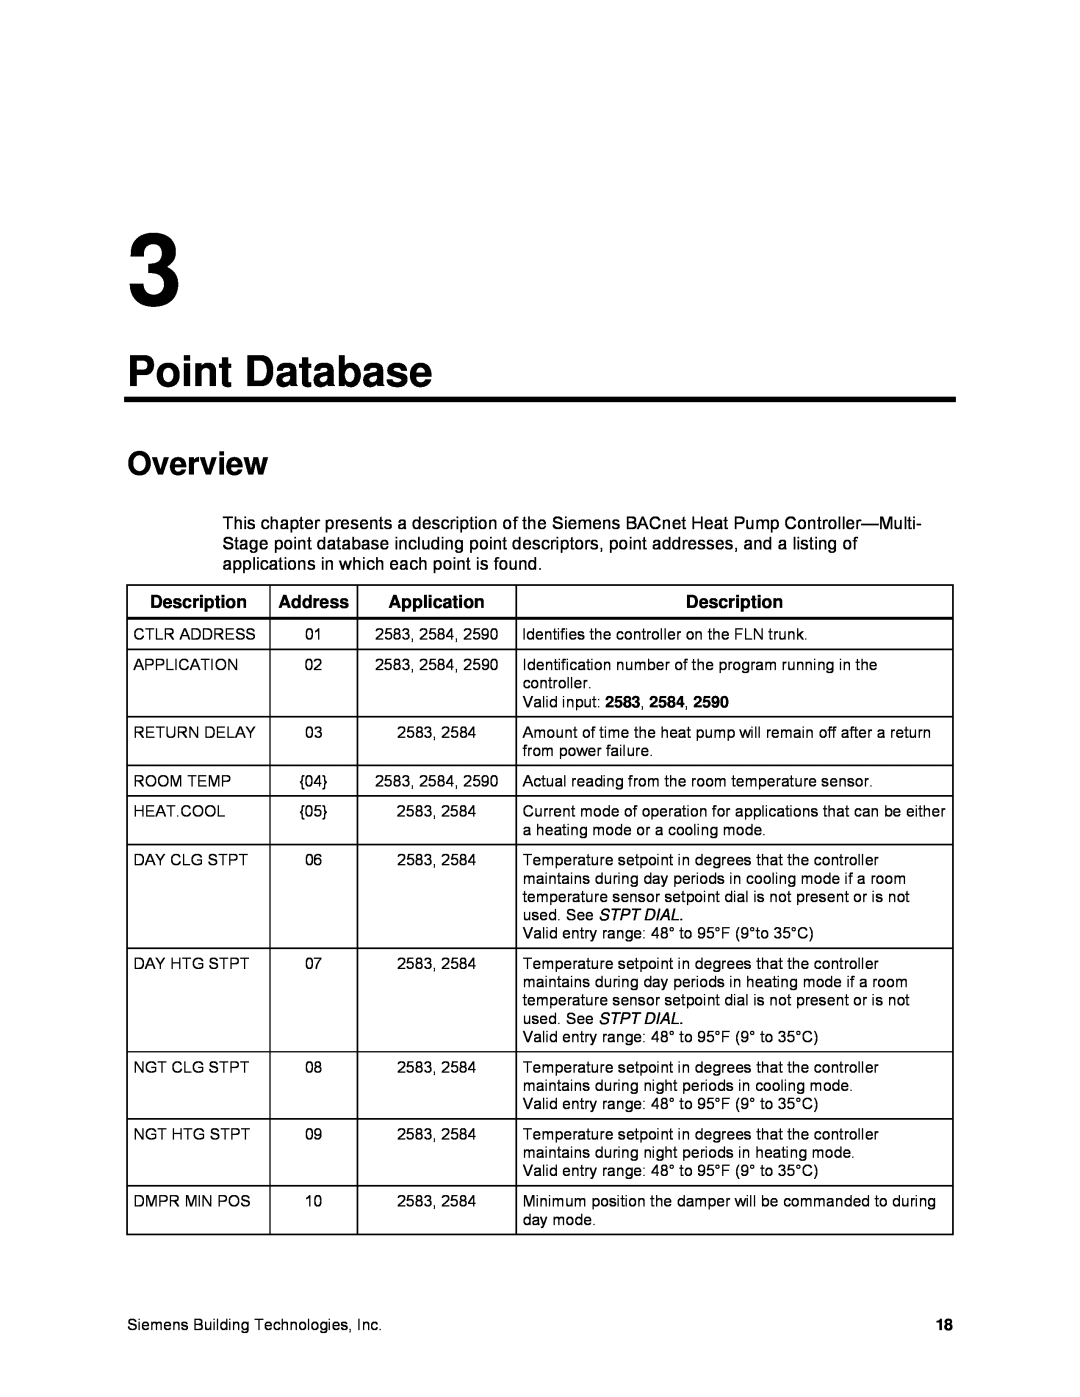 Siemens 125-699 owner manual Point Database, Overview 